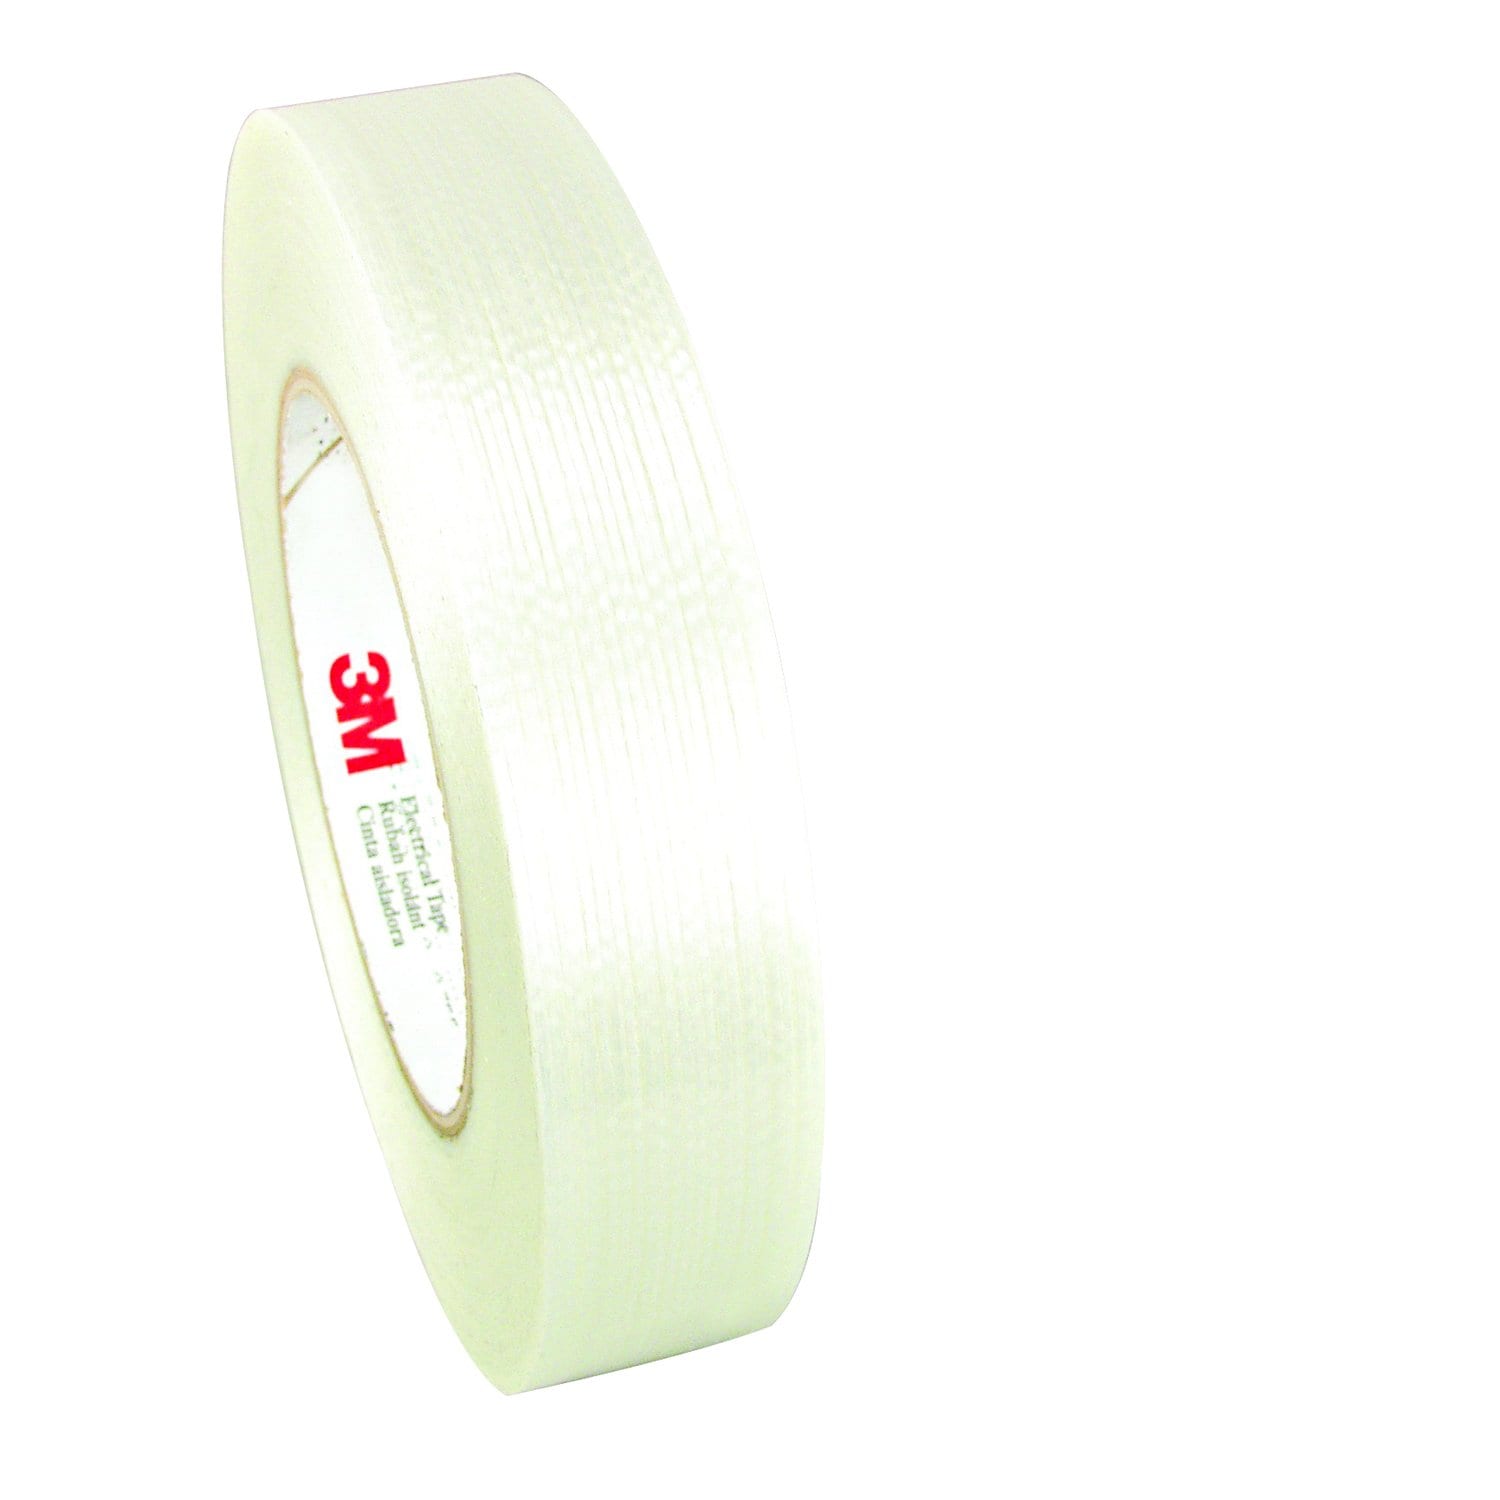 7100132440 - 3M Filament-Reinforced Electrical Tape 1339, Config